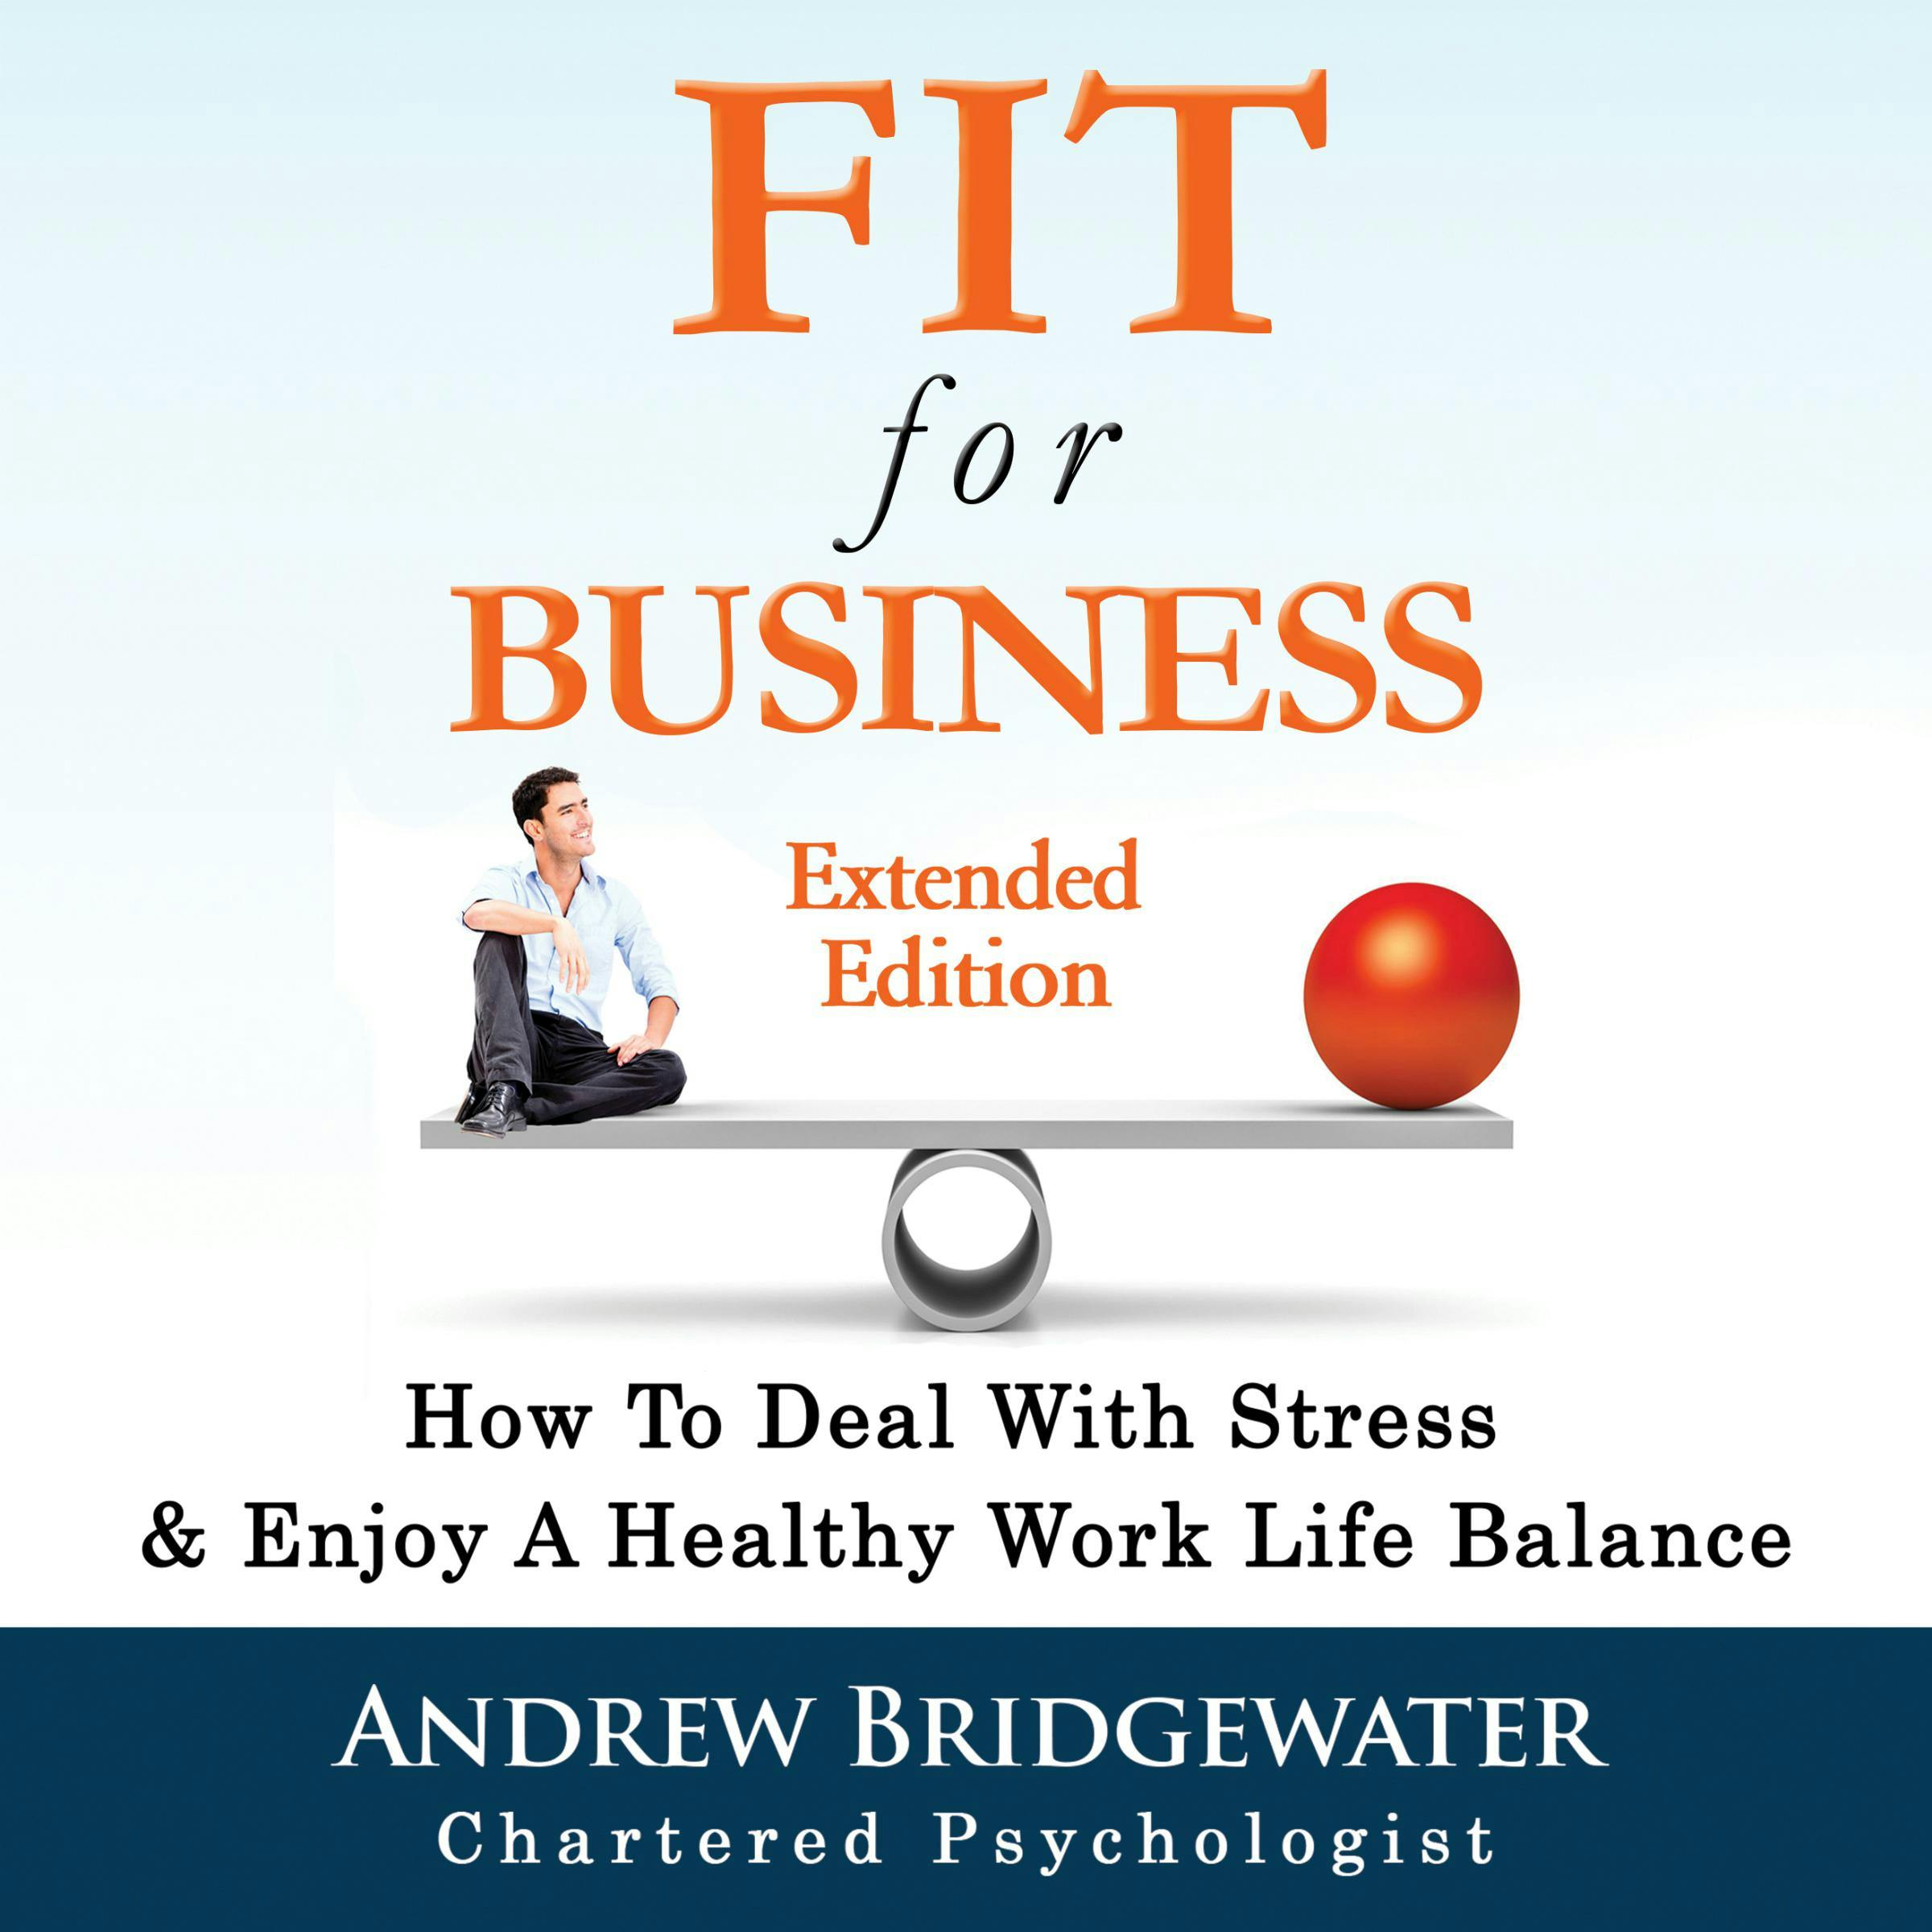 Fit For Business: How To Deal With Stress & Create A Healthy Work Life Balance - Andrew Bridgewater